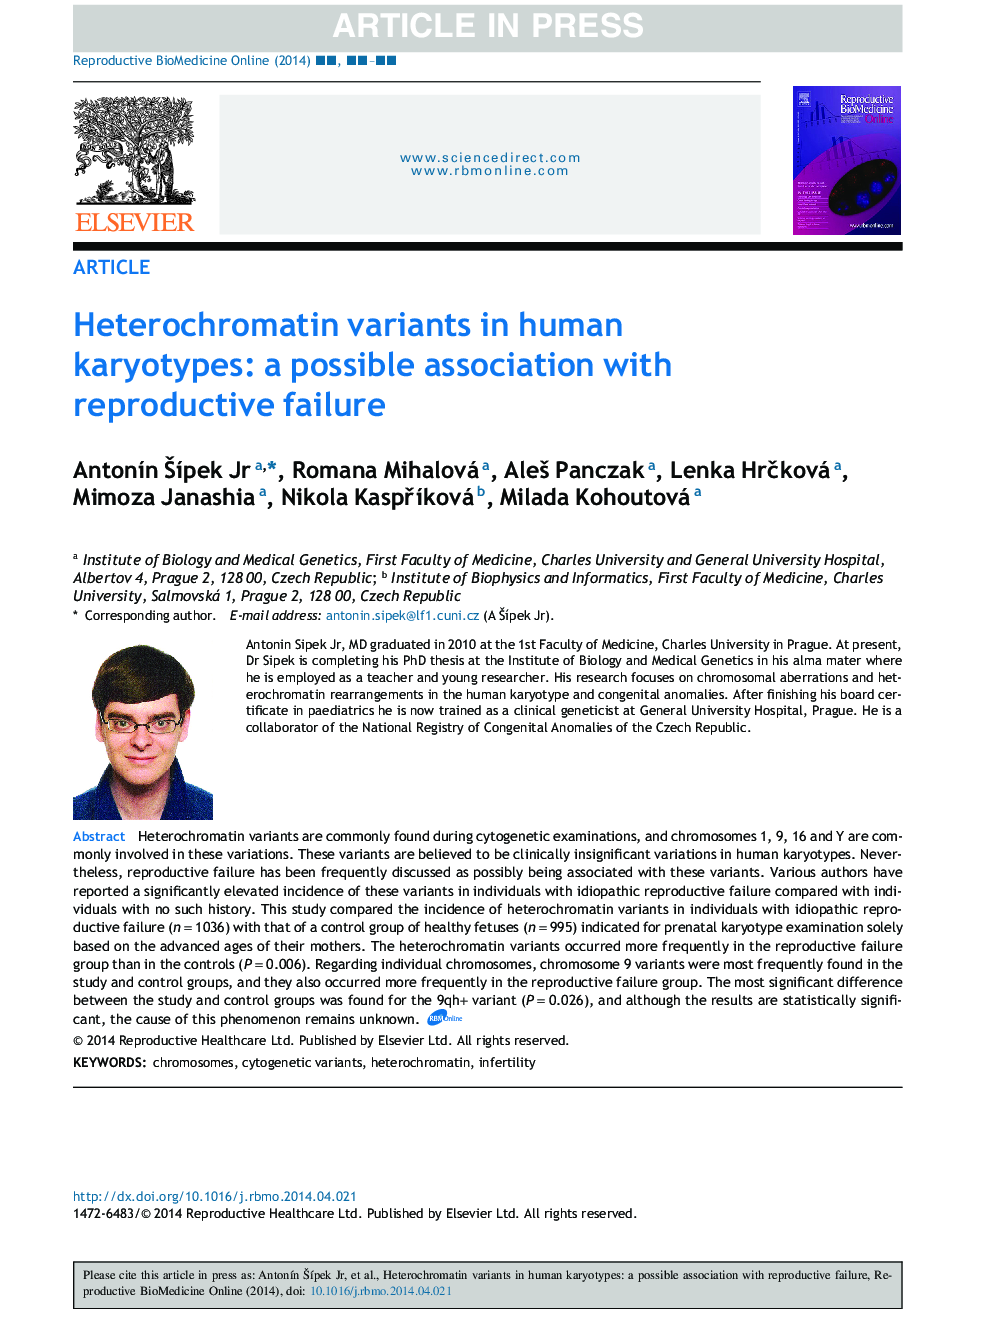 Heterochromatin variants in human karyotypes: a possible association with reproductive failure